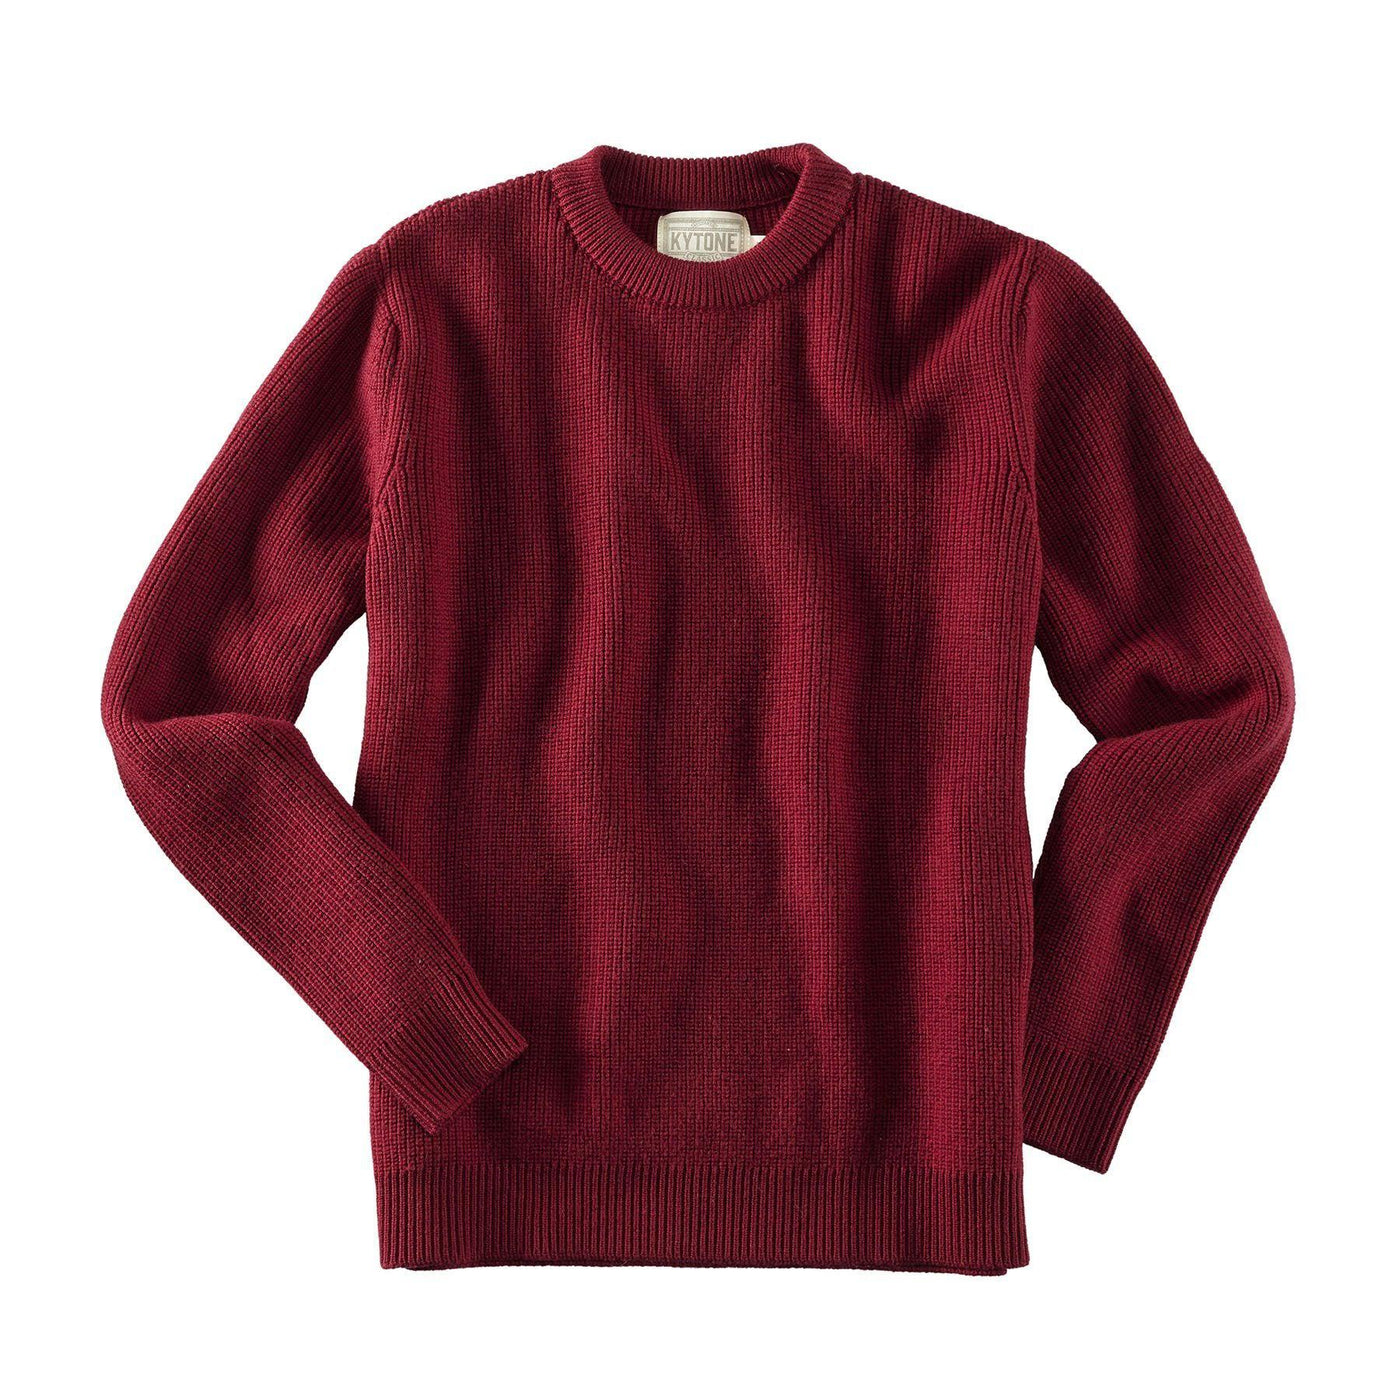 Kytone Pullover Oslo Red